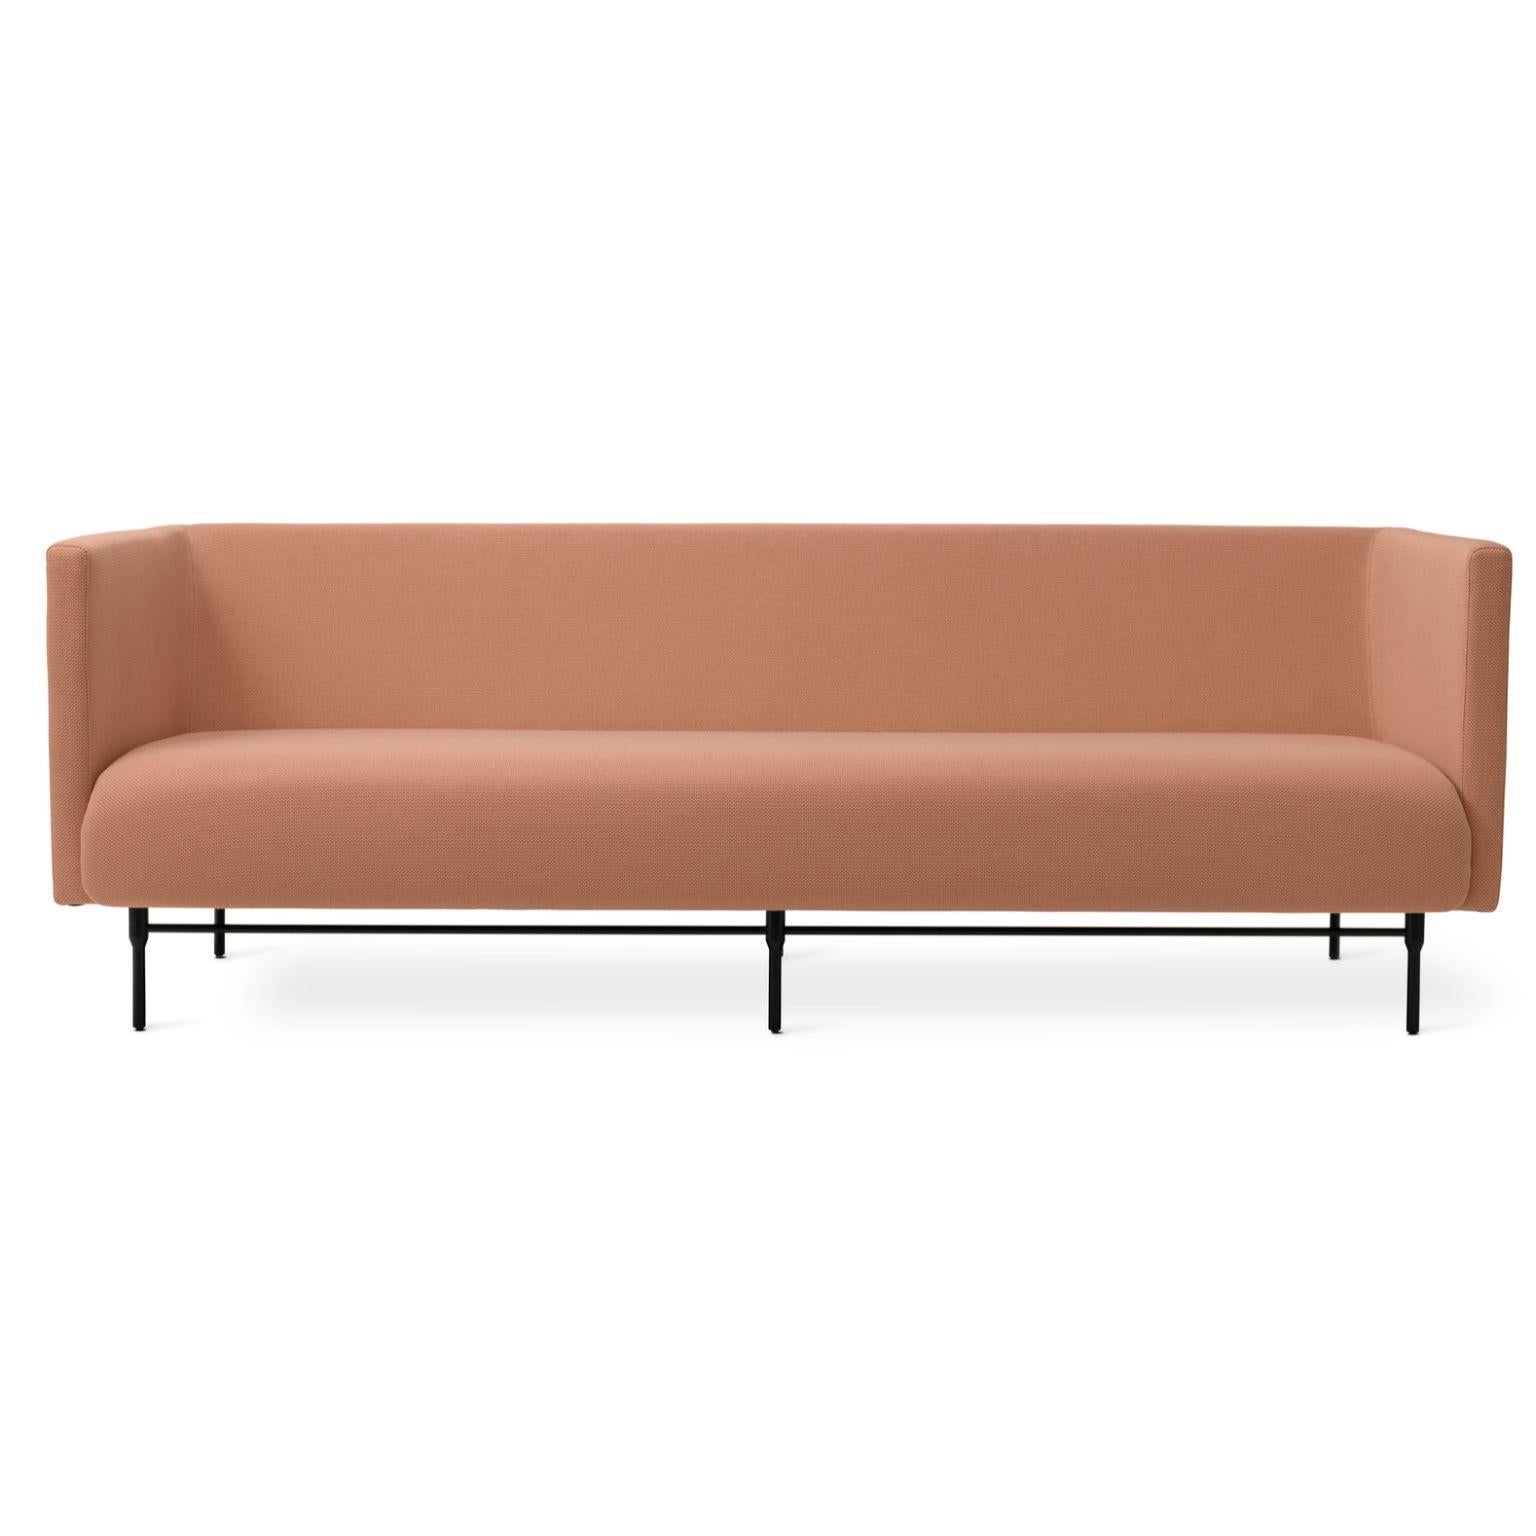 Galore 3 Seater Fresh Peach by Warm Nordic
Dimensions: D222 x W83 x H 76 cm
Material: Textile upholstery, Powder coated black steel legs, Wooden frame, foam, spring system.
Weight: 62 kg
Also available in different colours and finishes. Please